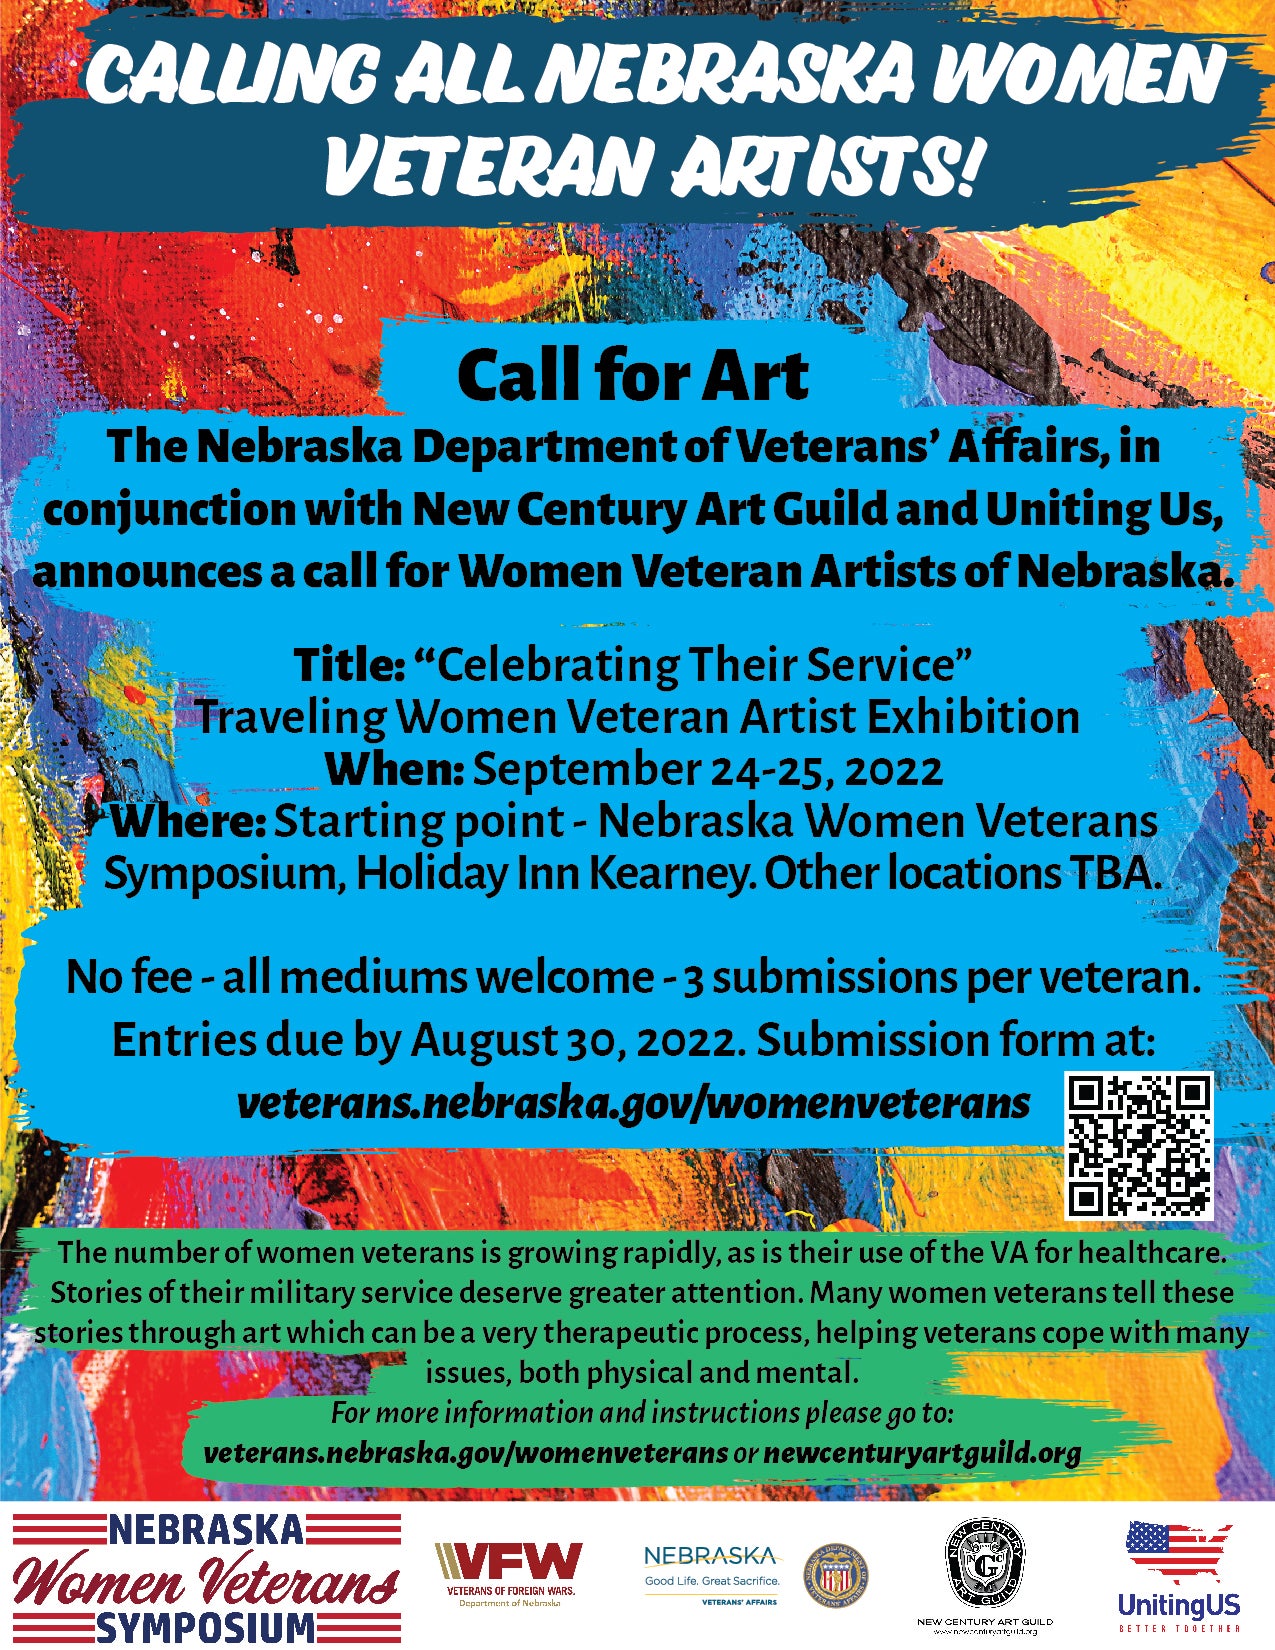 Call for Art poster